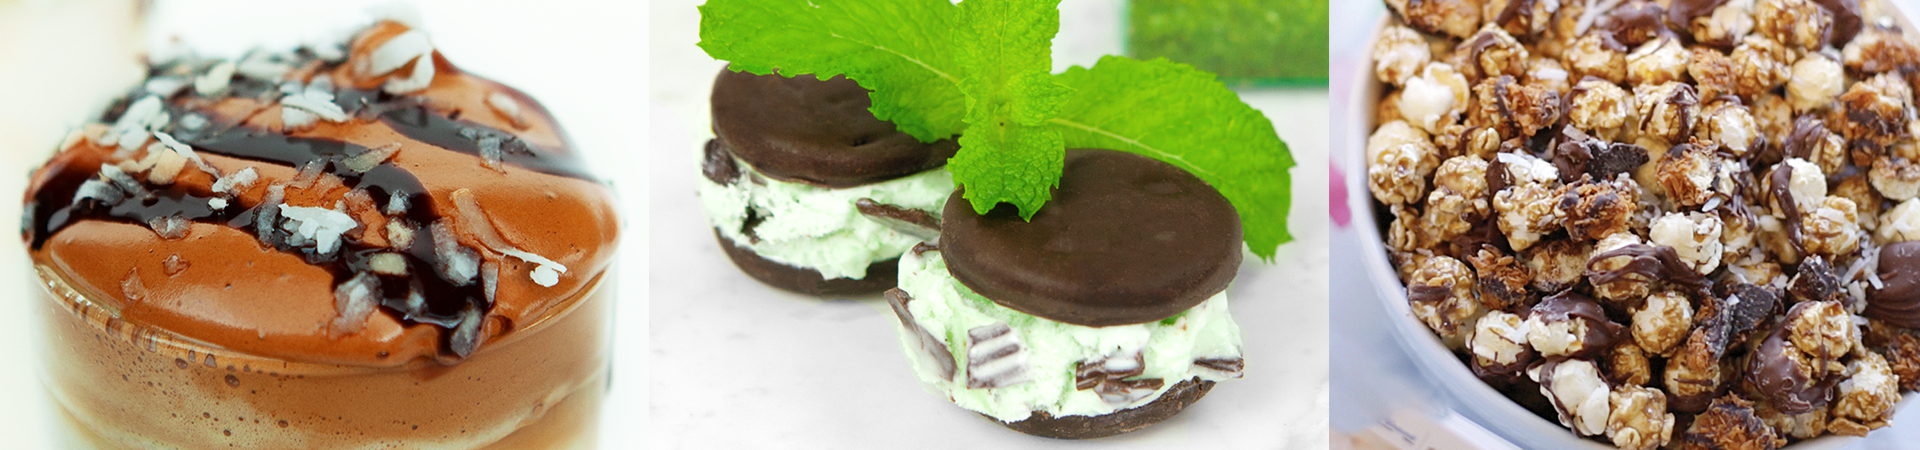  delicious girl scout cookie recipe images 